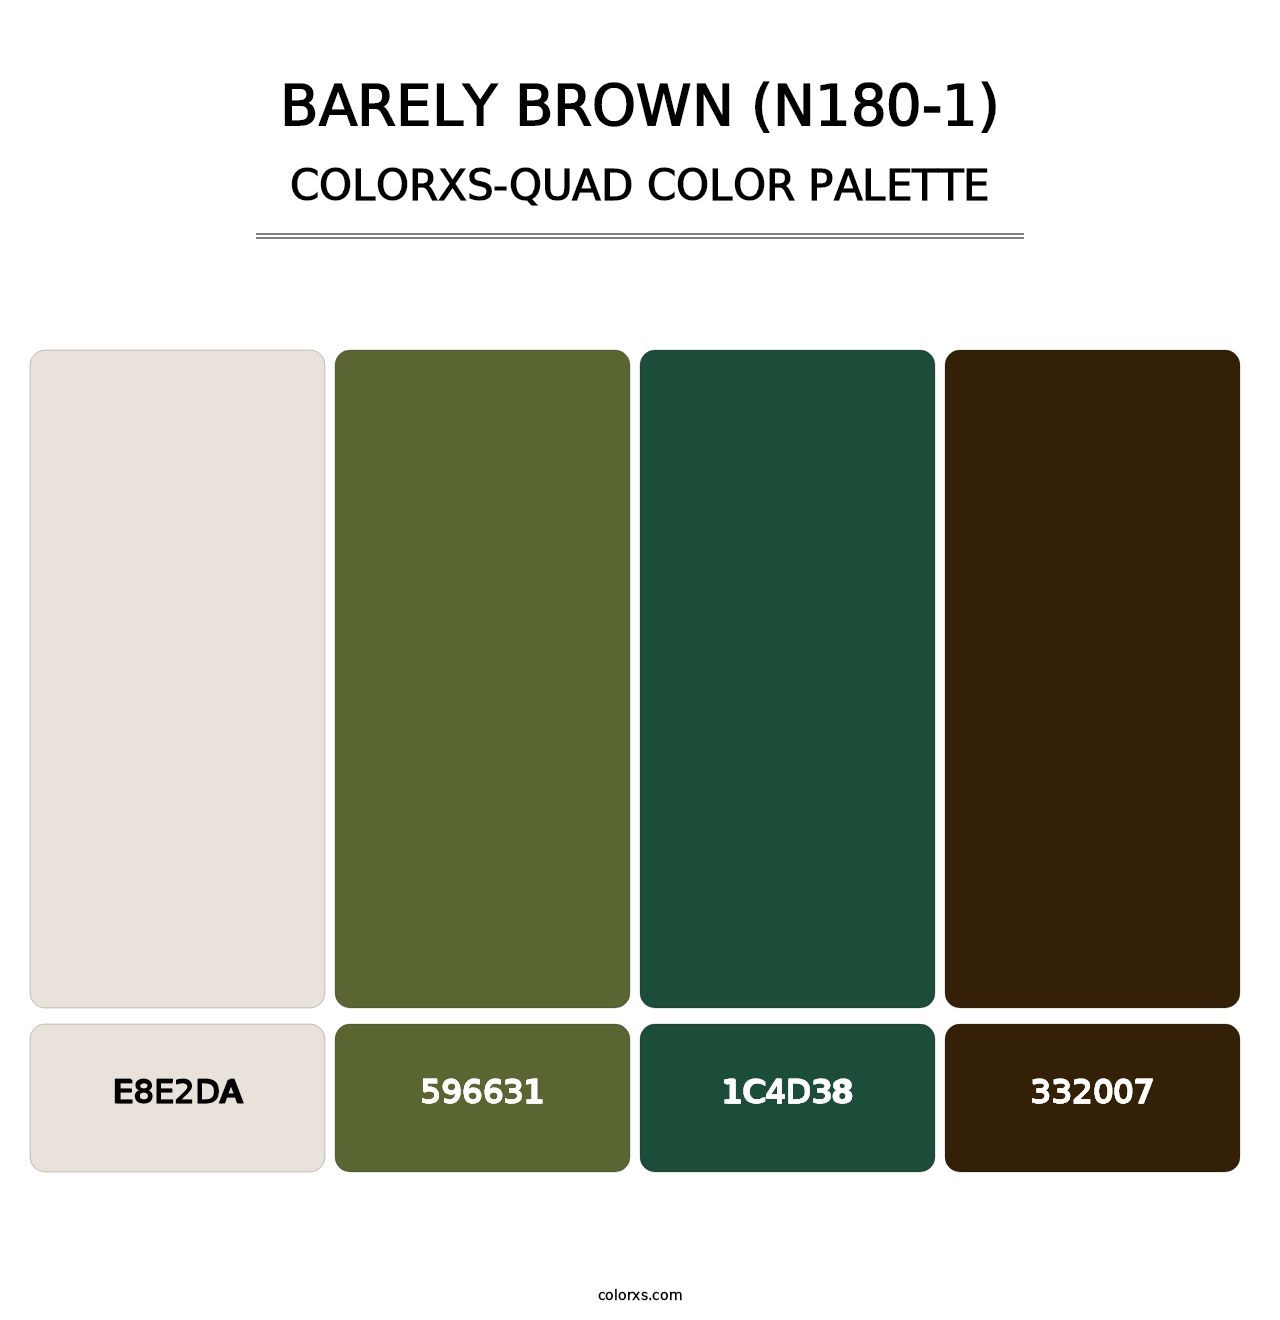 Barely Brown (N180-1) - Colorxs Quad Palette